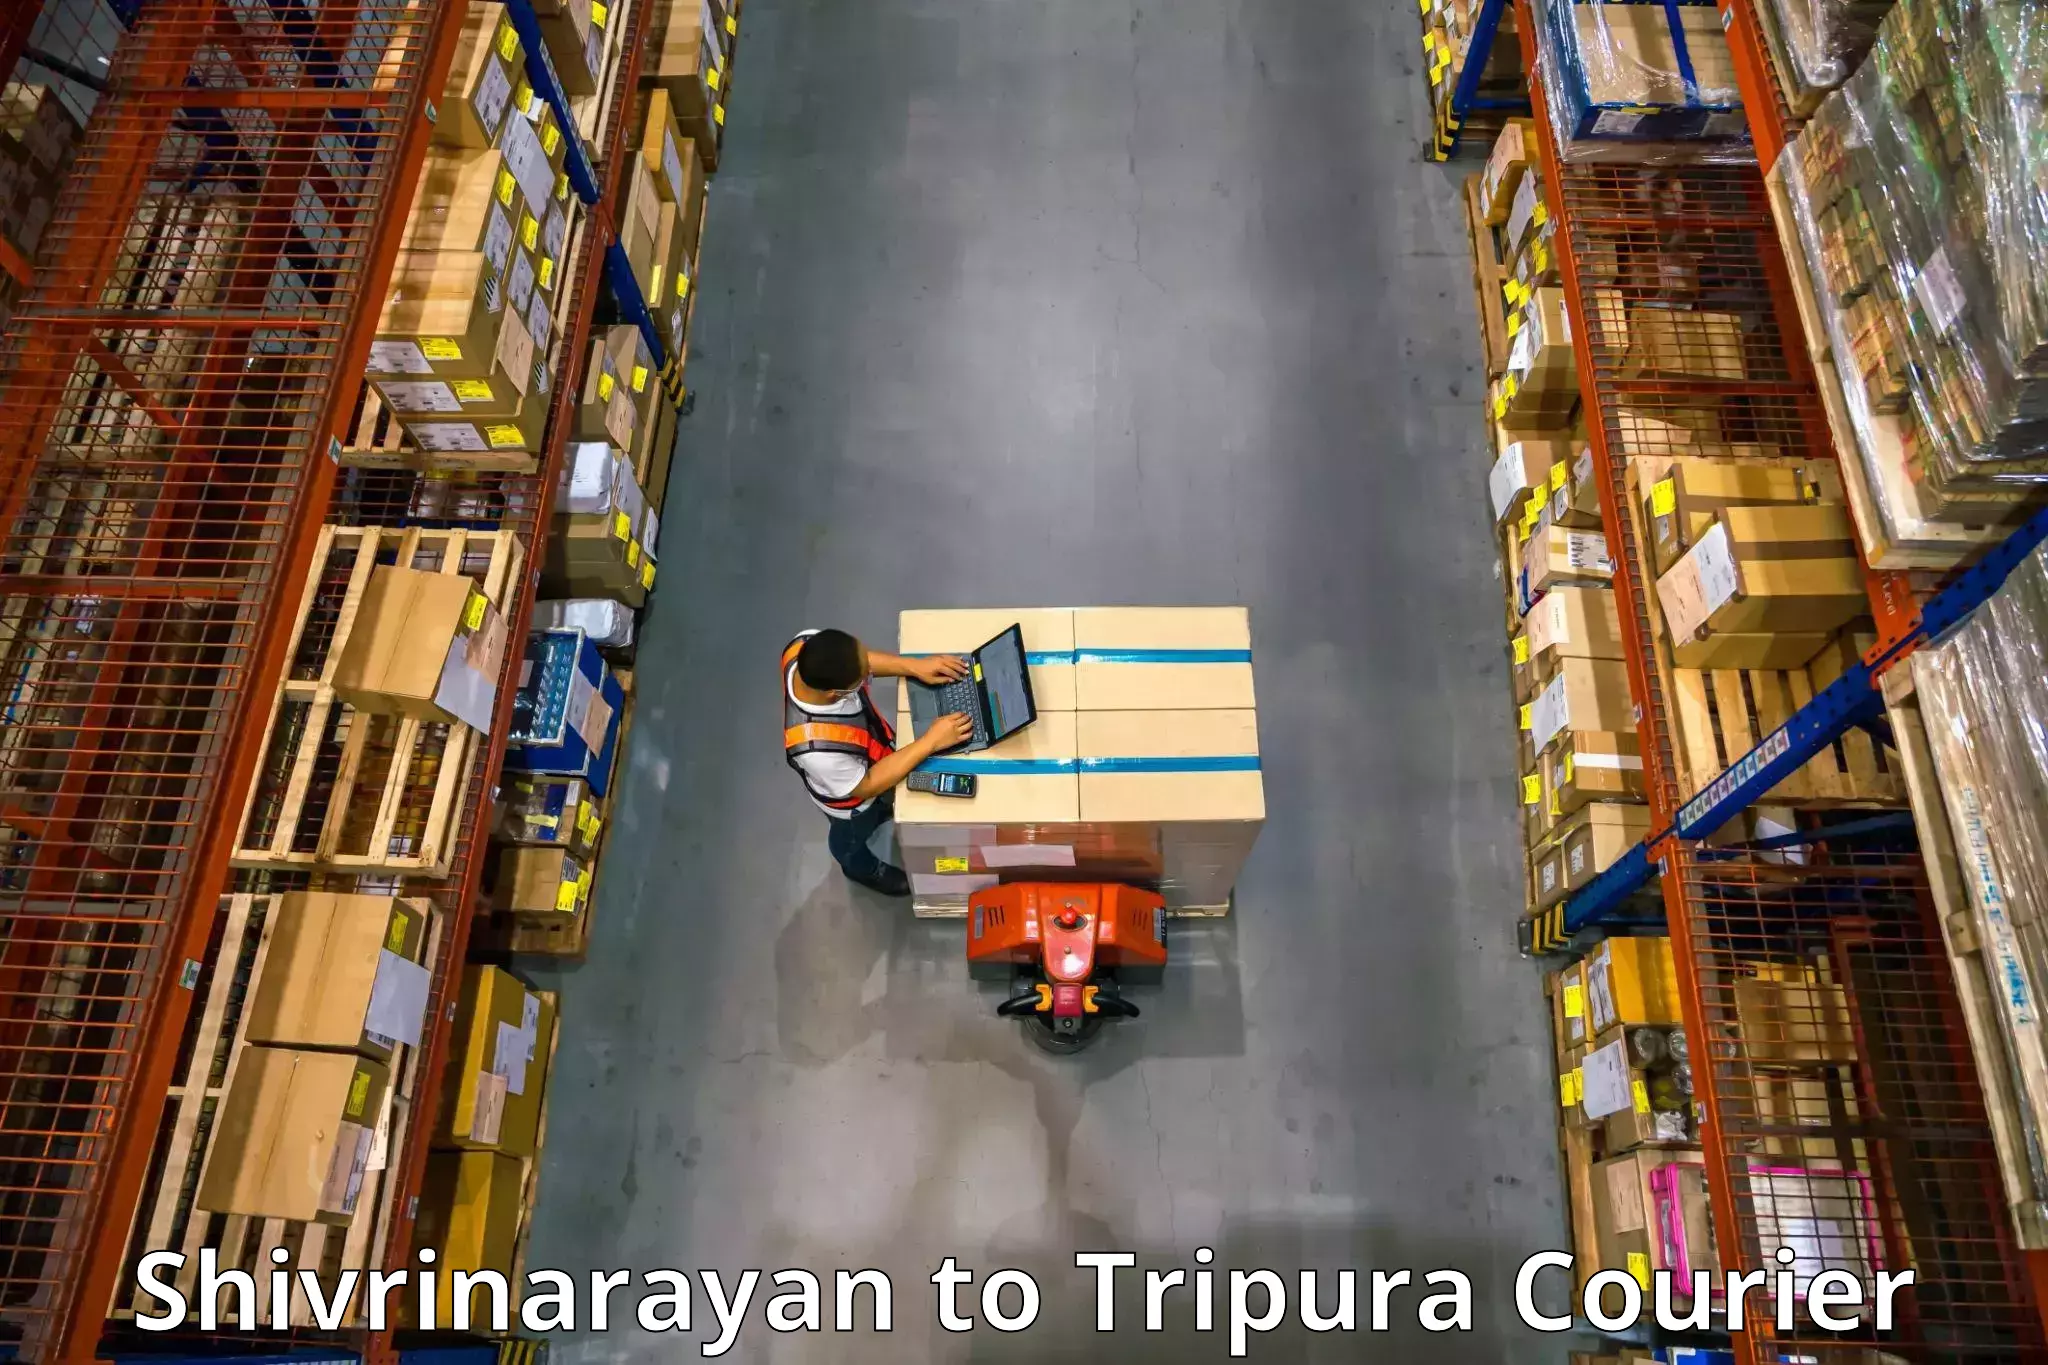 Moving and storage services in Shivrinarayan to Udaipur Tripura